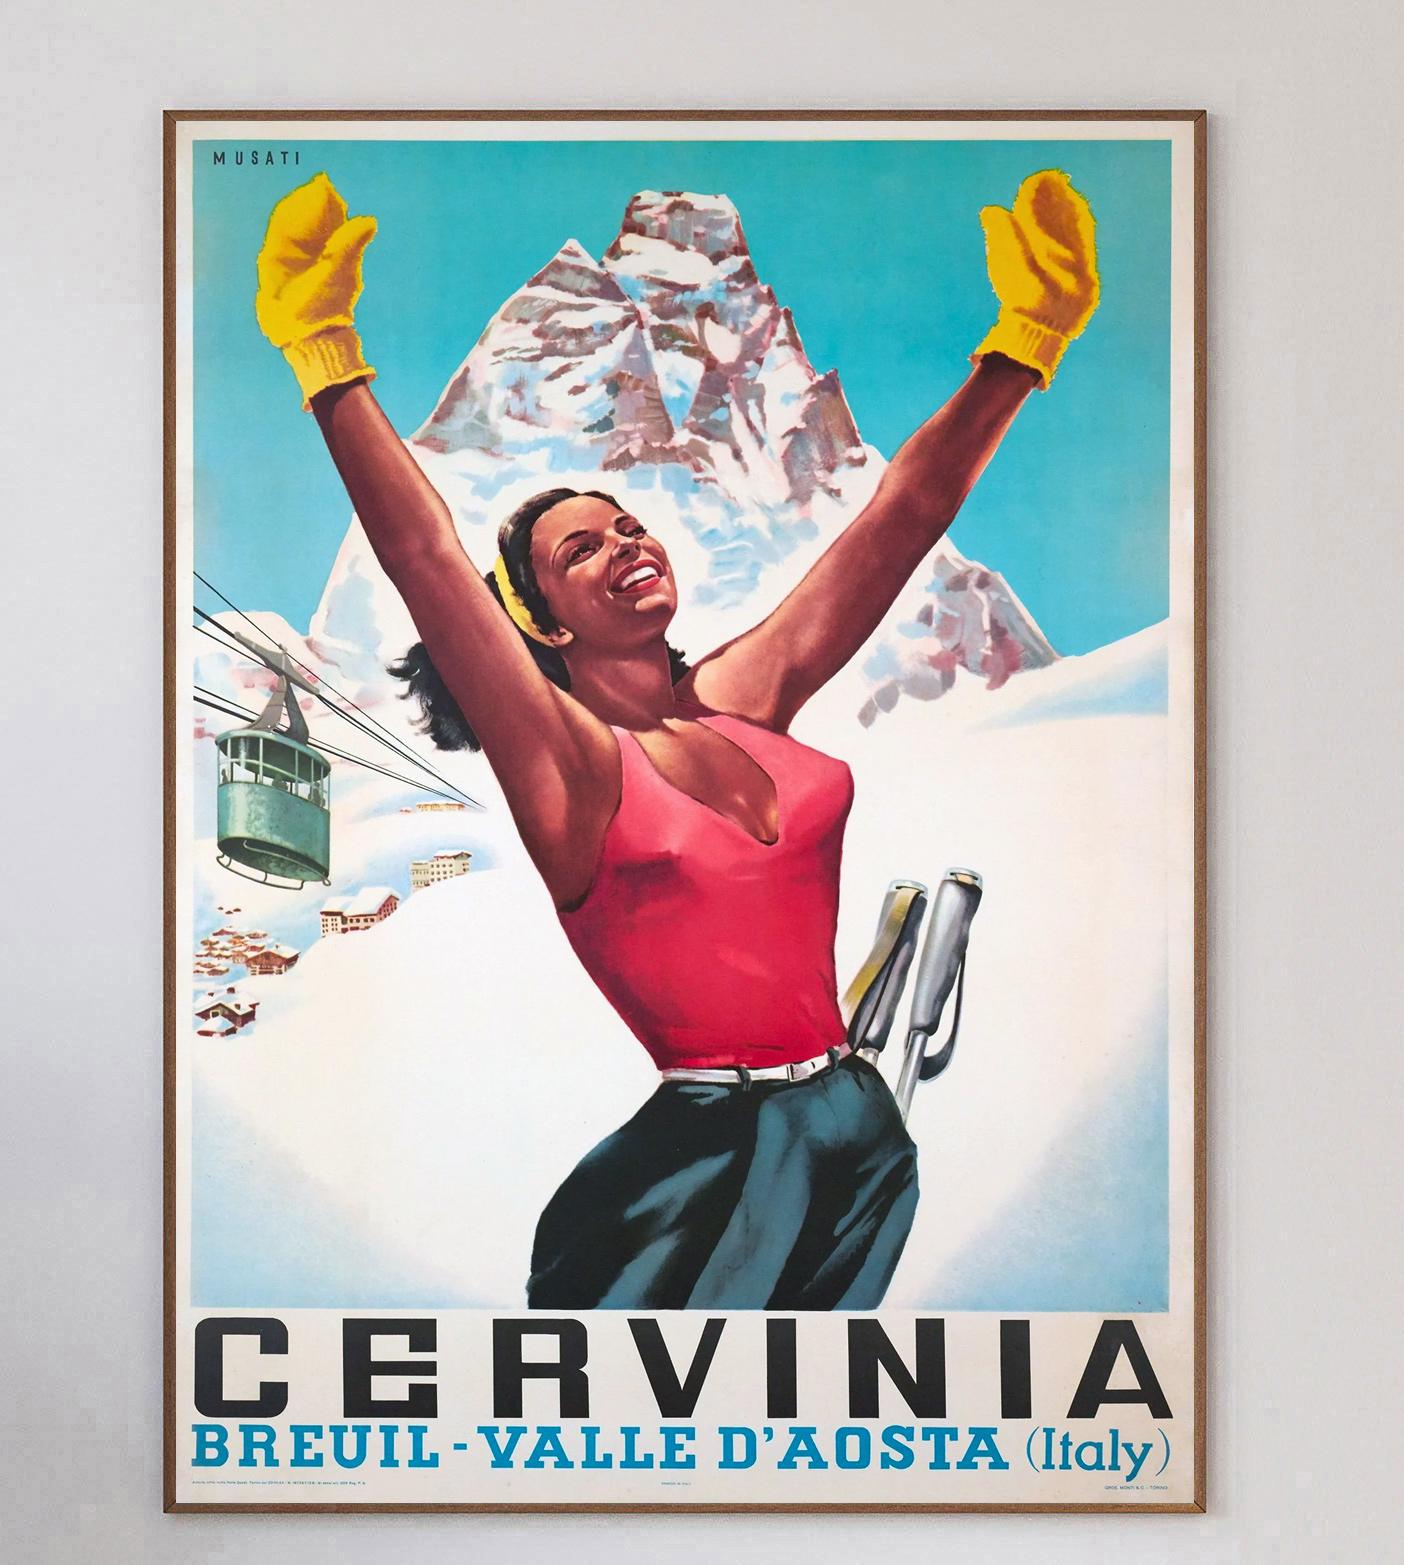 Beautiful vibrant poster from 1953 promoting the ski resort of Cervinia in the Aosta region of Northwest Italy. This poster was created to advertise the region to tourists across Europe.

With wonderful artwork from Italian poster artist Arnaldo